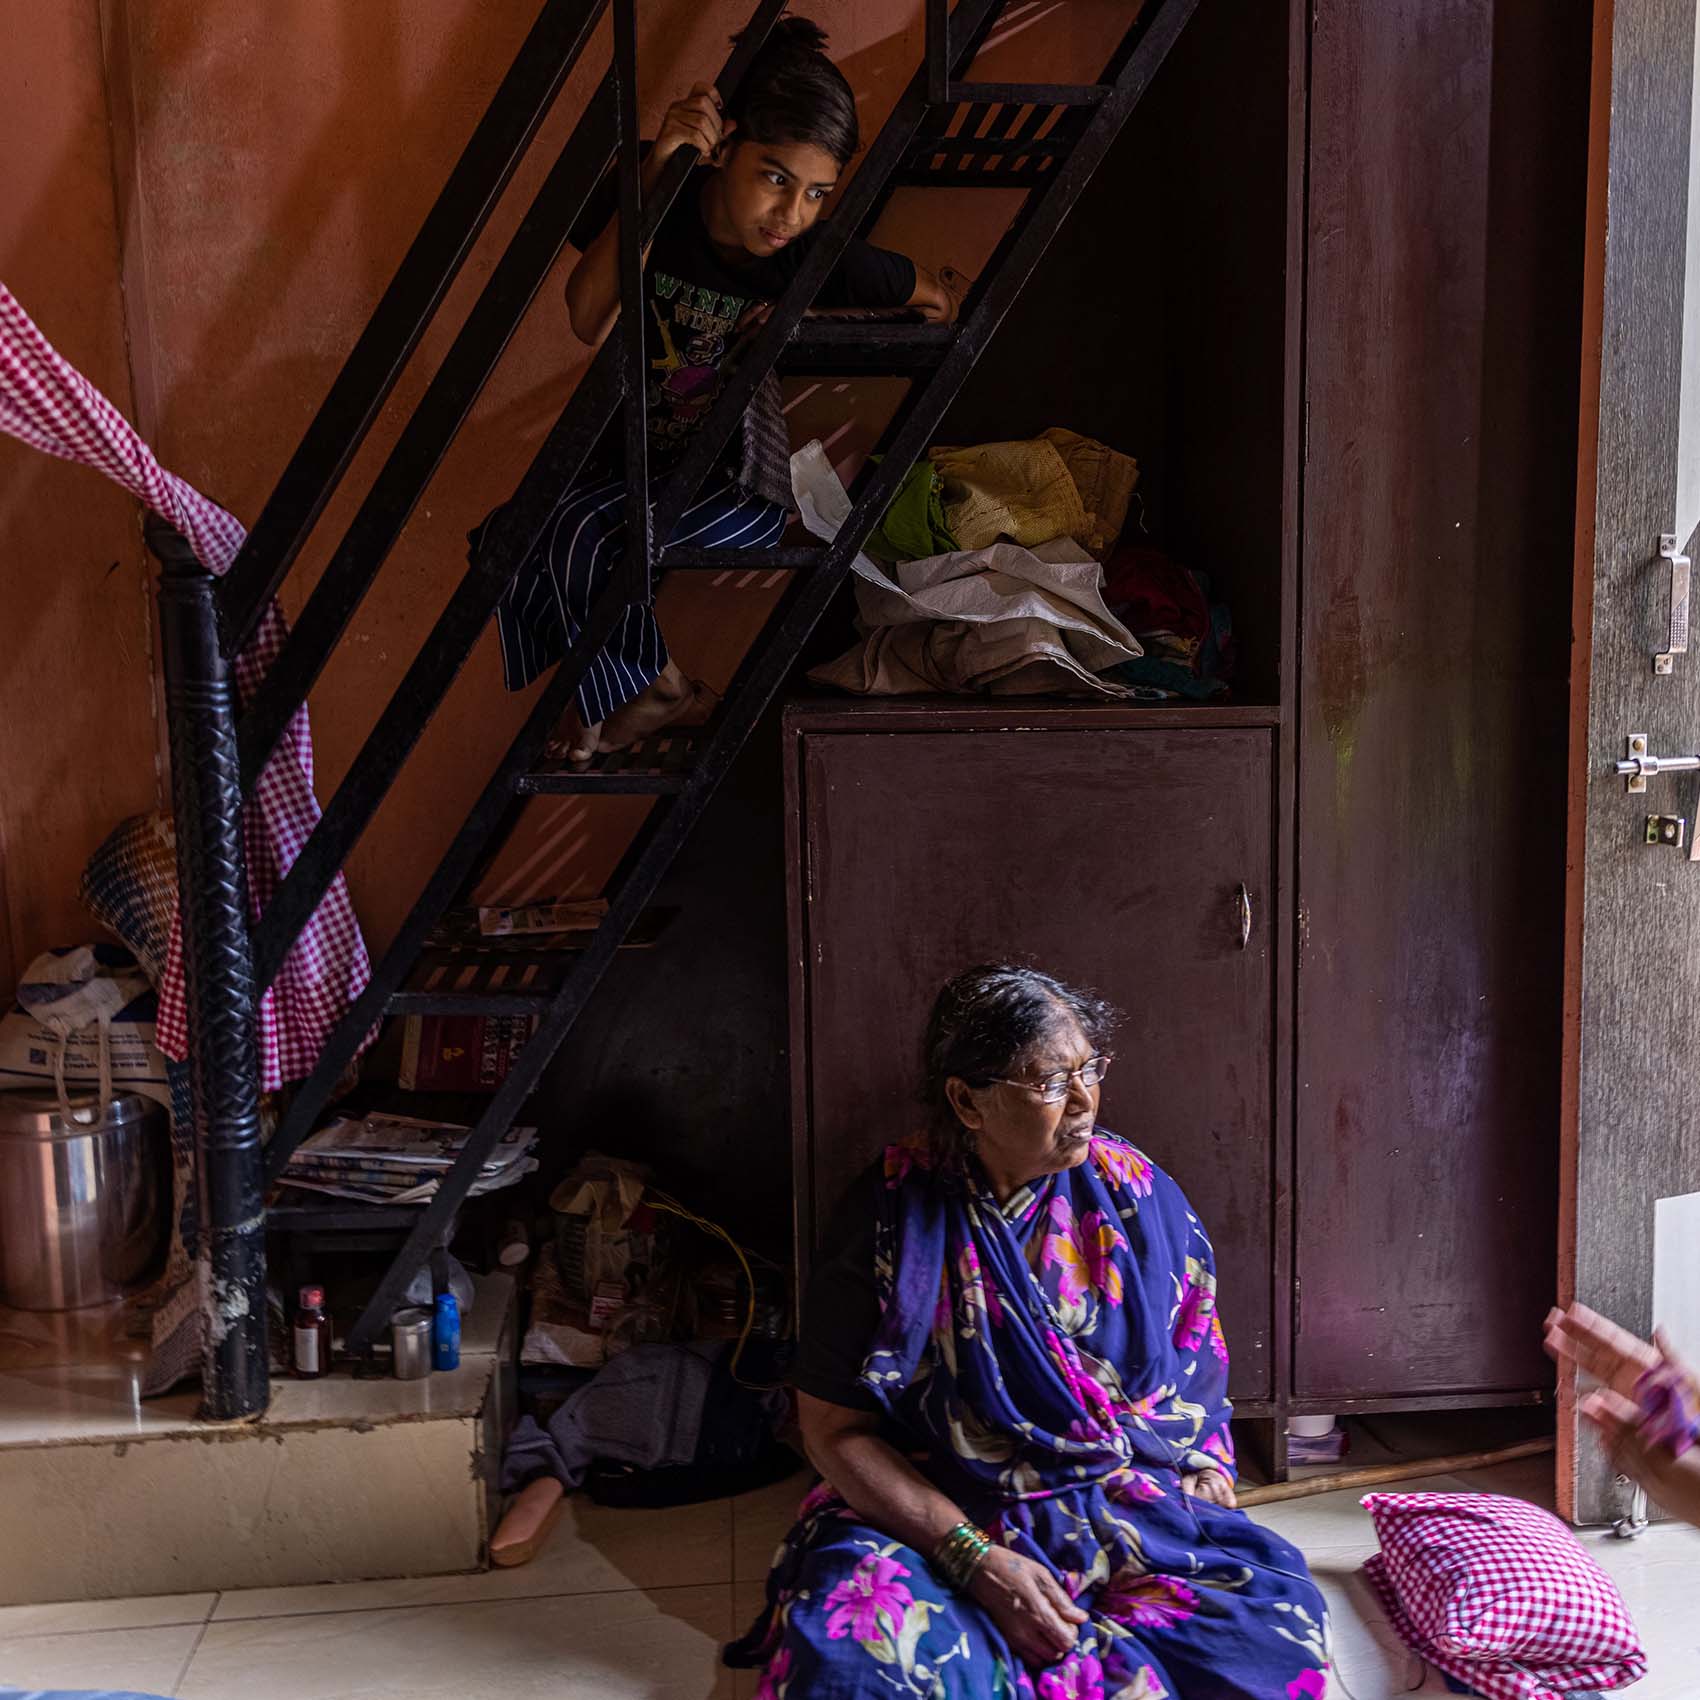 Ratan is sitting in her house in India near the stair. She is one of CORE's beneficiary during our food distribution in 2022.